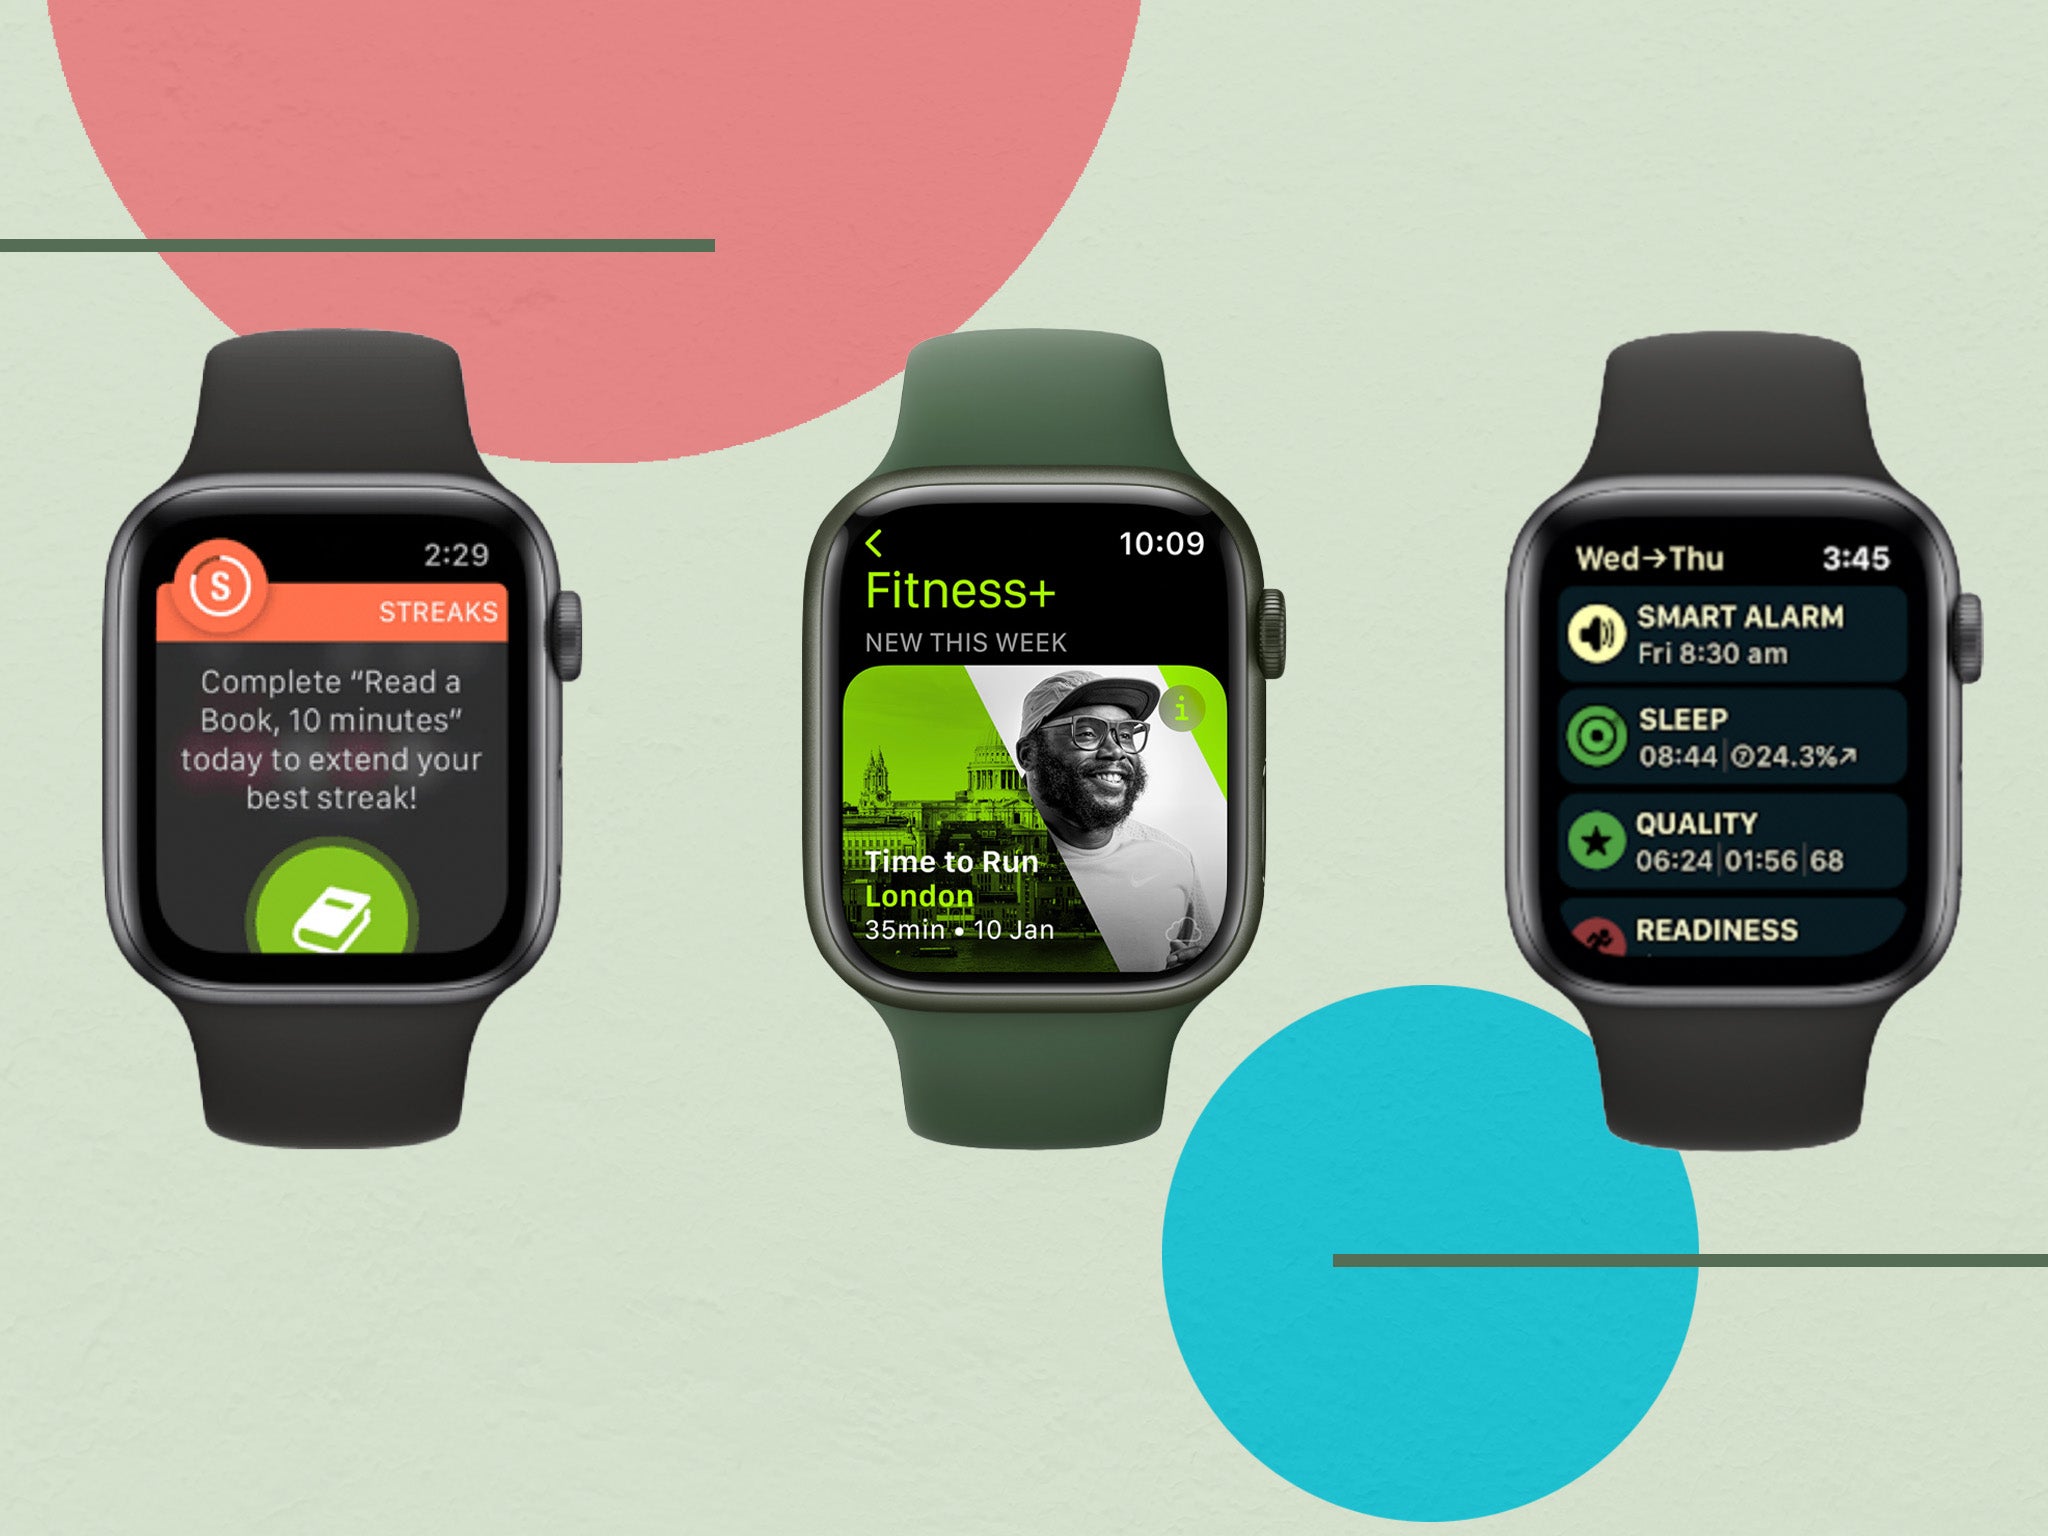 Best Apple Watch apps 2022: Top free and paid apps for getting the